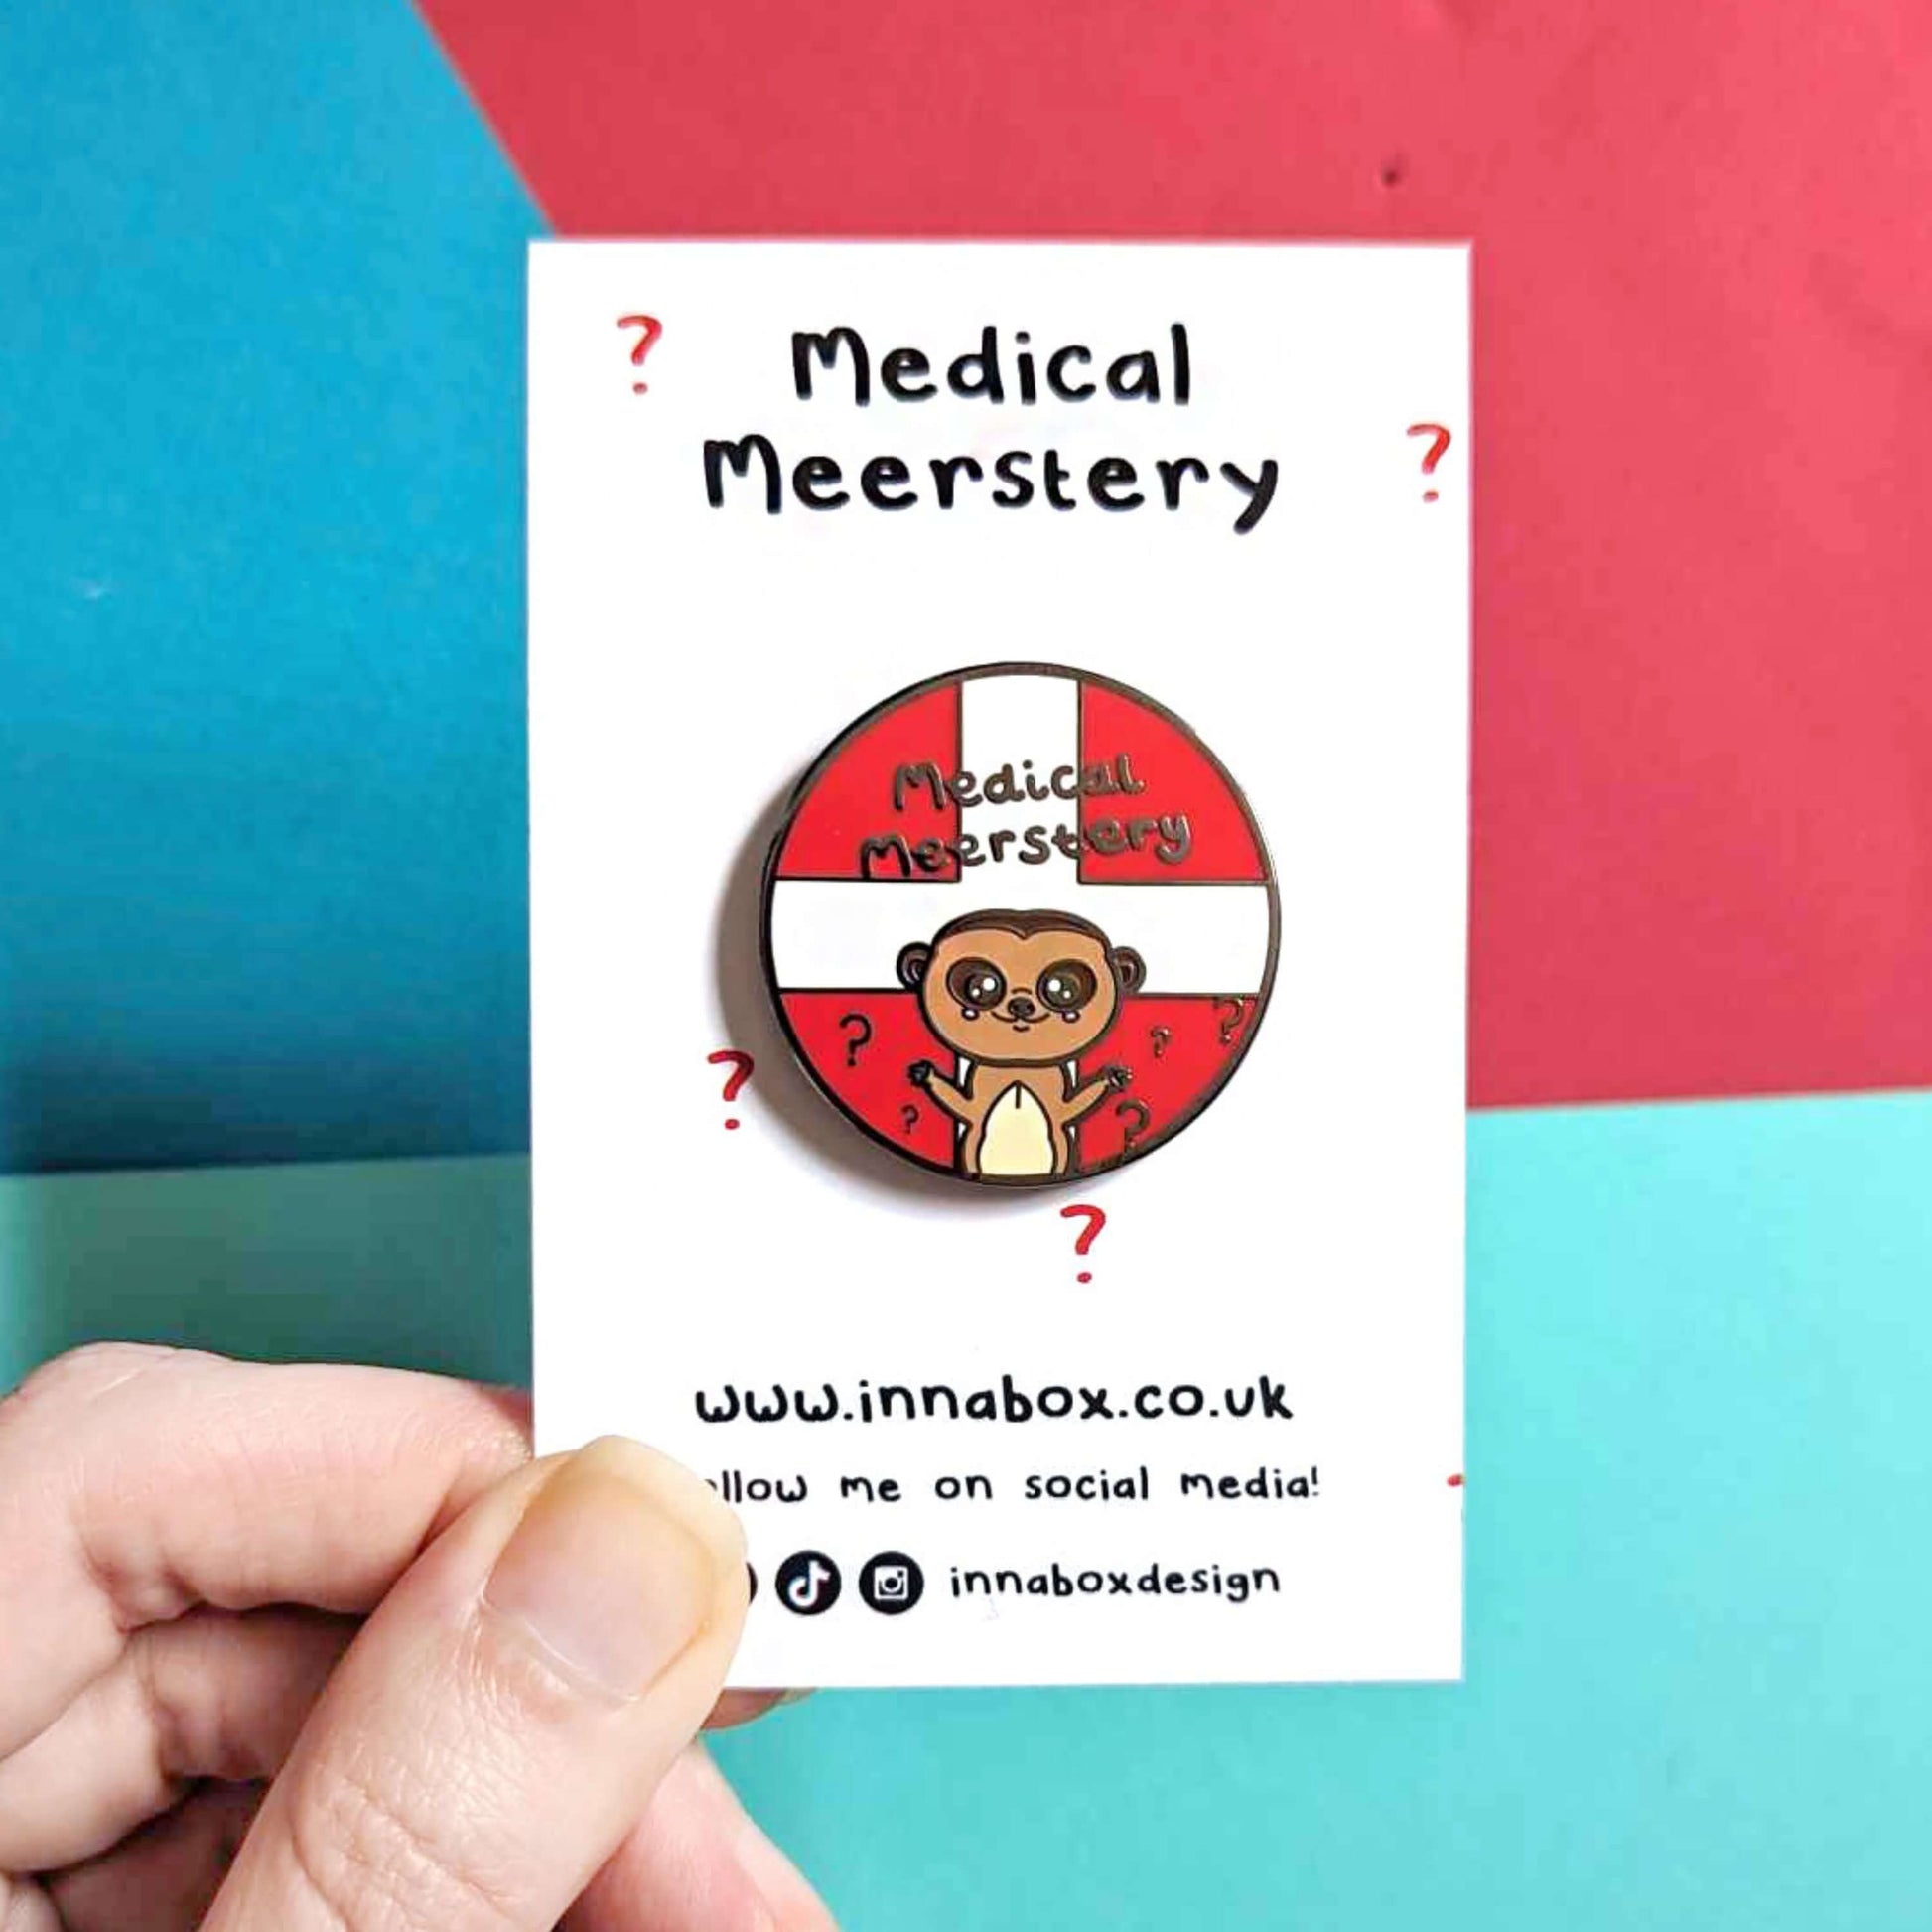 Medical Mystery Meerkat Enamel Pin on white backing card with red questions mark on held in front of a red and blue background. The enamel pin is a red circle with white first aid cross and a cute meerkat at the bottom with big eyes and has it's little arms open wide. There are black question marks around the meerkat and 'medical meerstery' written above it in black writing. Hand drawn design made to raise awareness for invisible and chronic illnesses